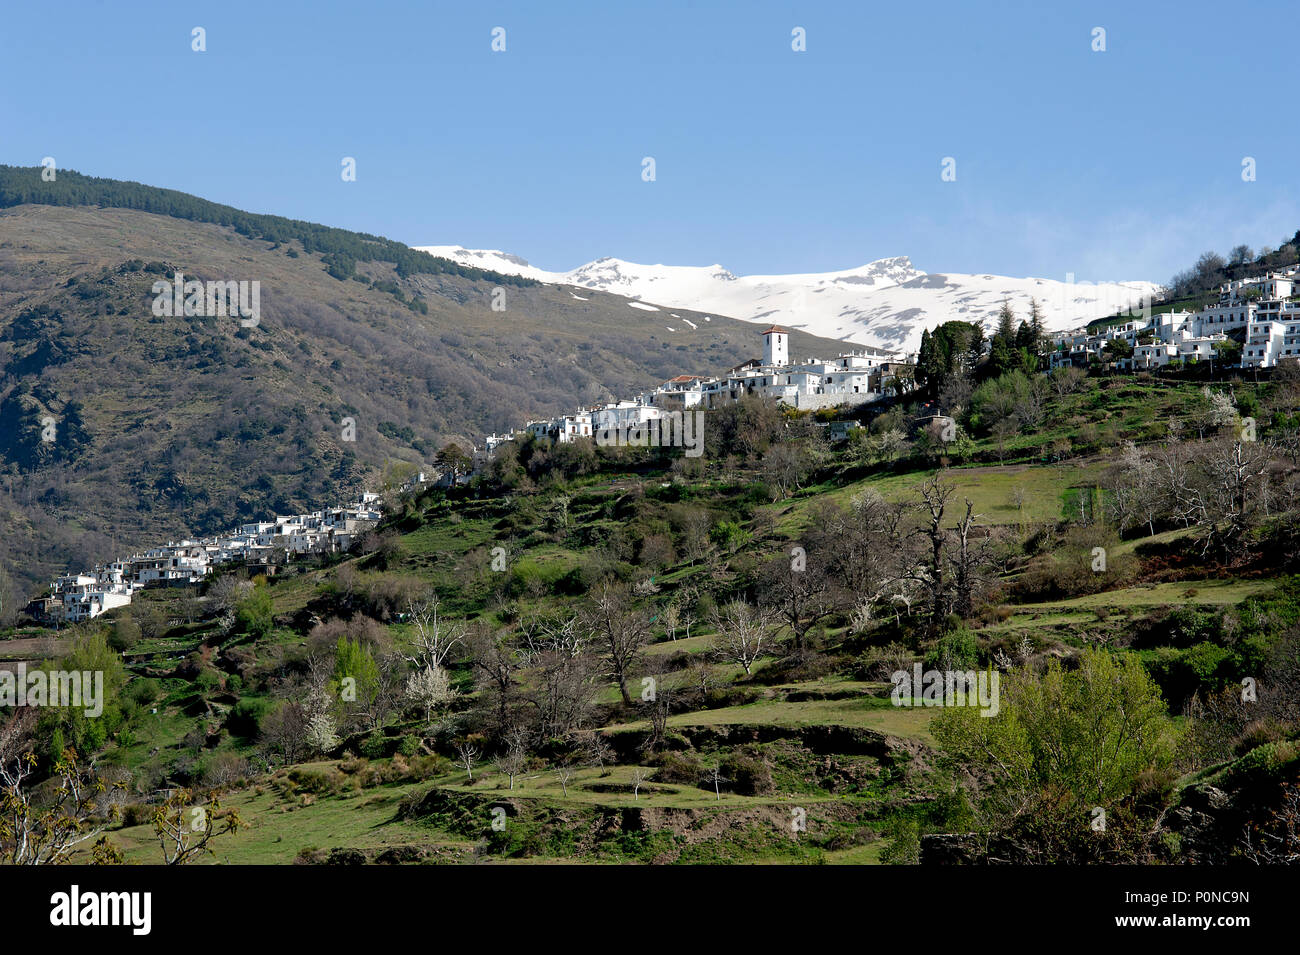 the picturesque Alpujarran village of Capileira in its stunning location high up in the snow-capped Sierra Nevada mountains in Spain's Andalucia. Stock Photo